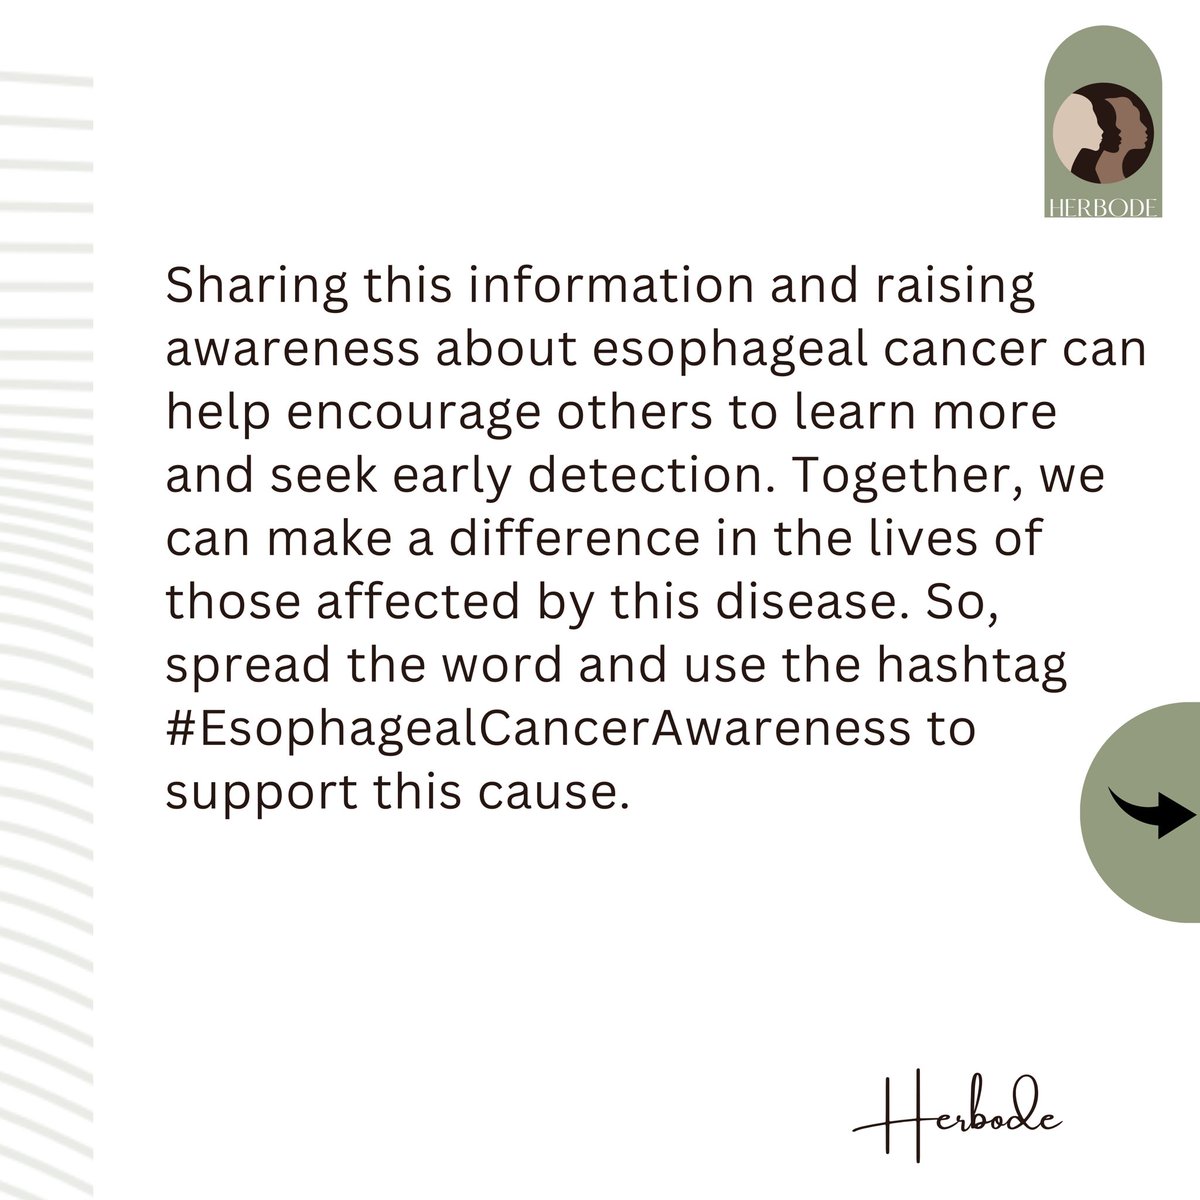 How can you help unaware victims of this cancer?? Share this information, spread the word and use the hashtag #EsophagealCancerAwareness to support the cause.

Together, we can make a difference in the lives of those affected by this disease💚